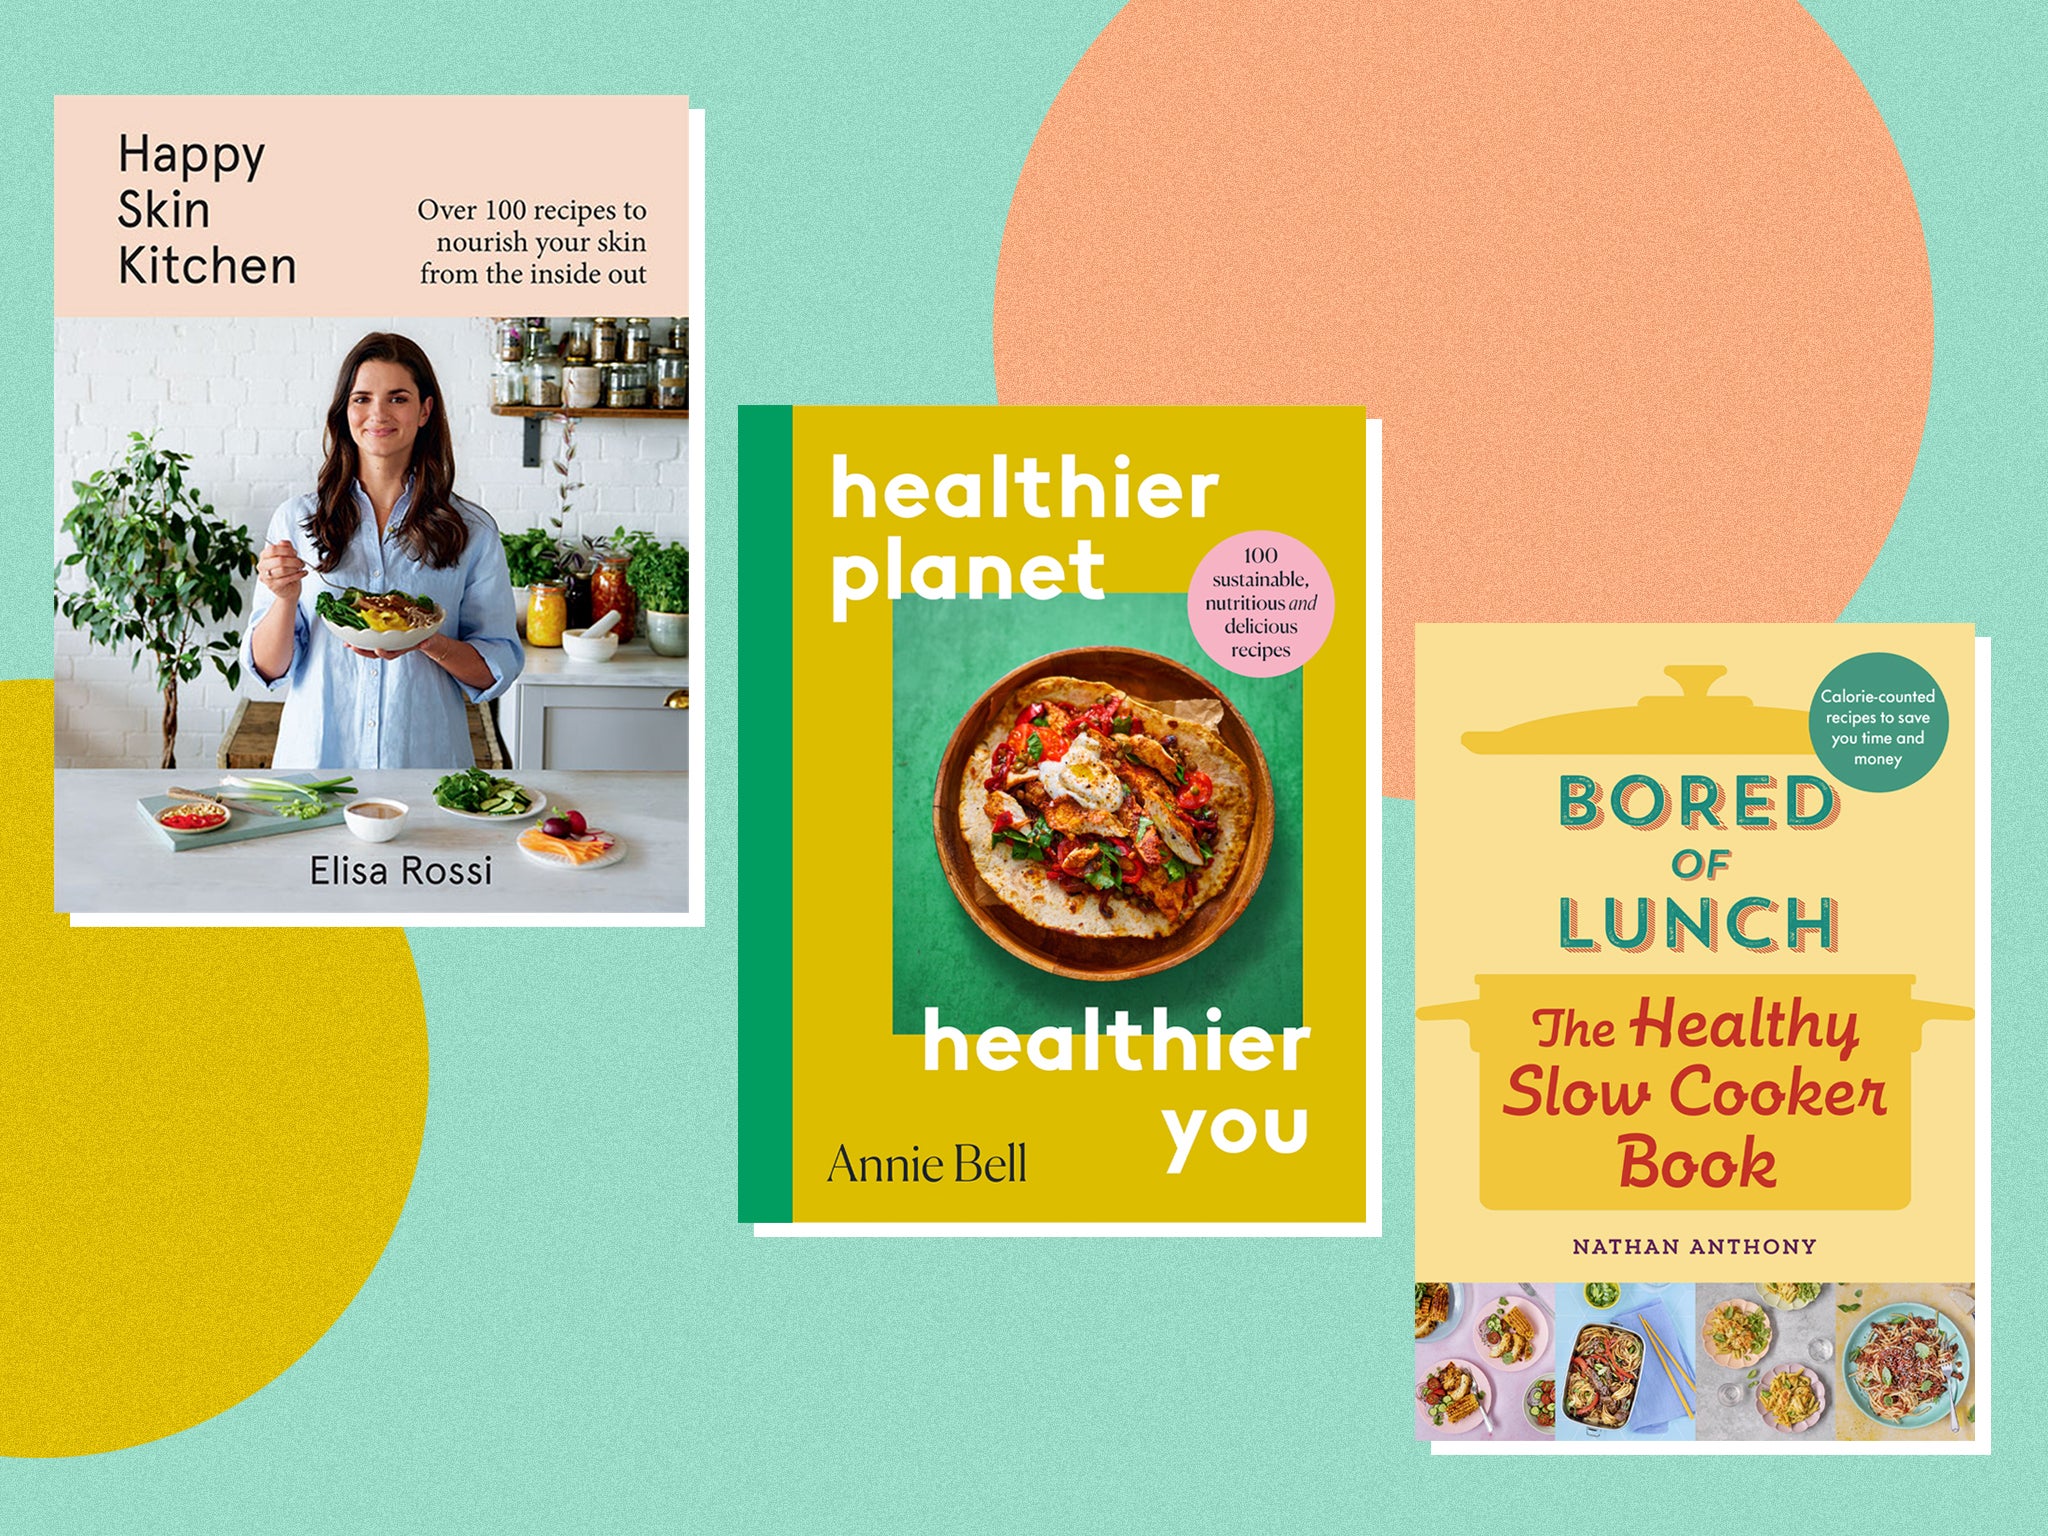 These cookbooks are not only healthy, they help save you money, make your skin glow and even help the environment